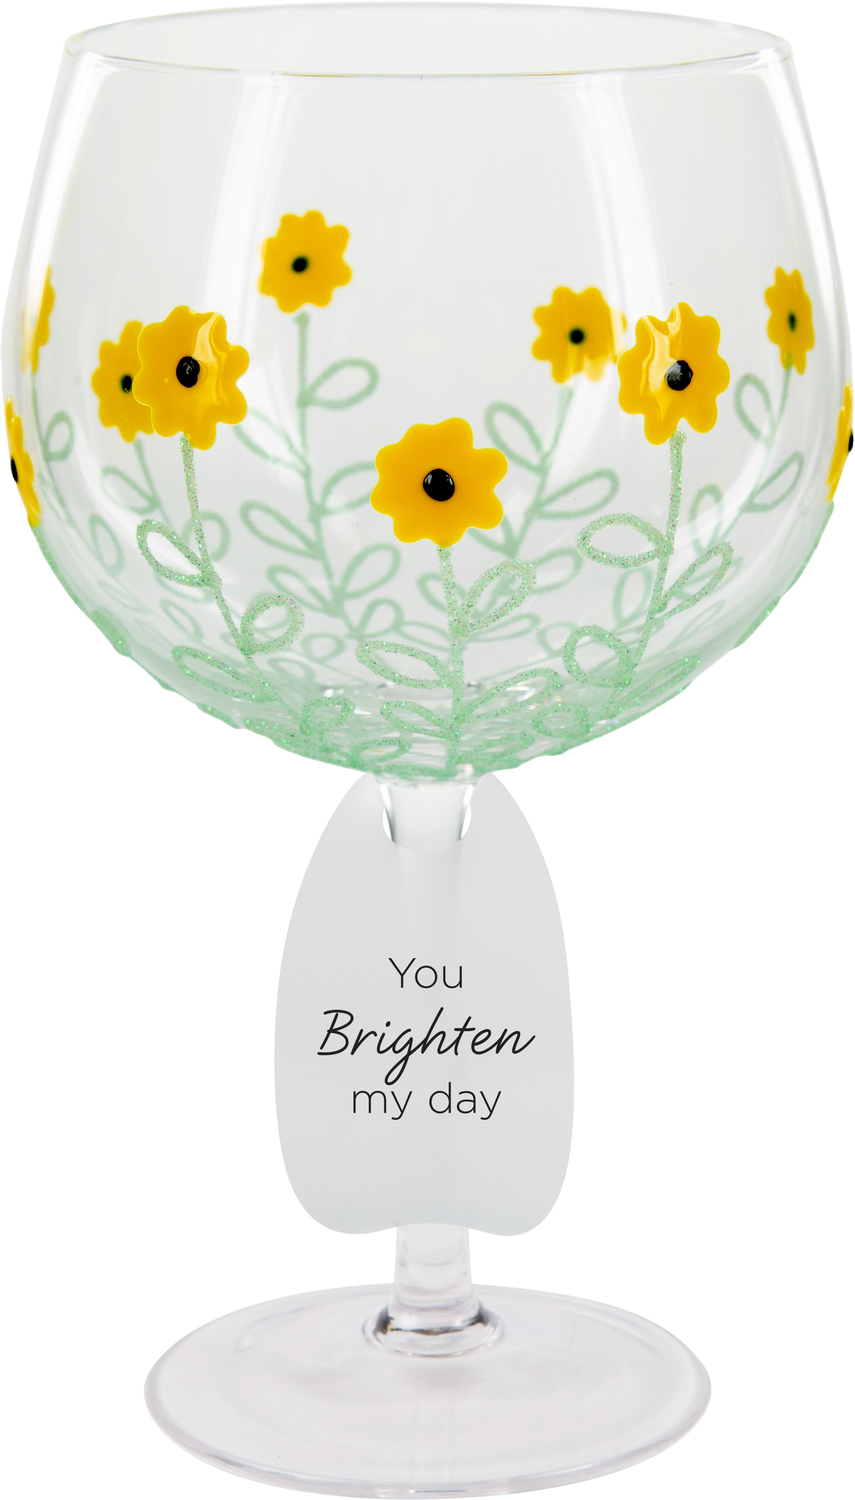 Sunflowers by Sunny by Sue - Sunflowers - 24 oz Hand Decorated Glass